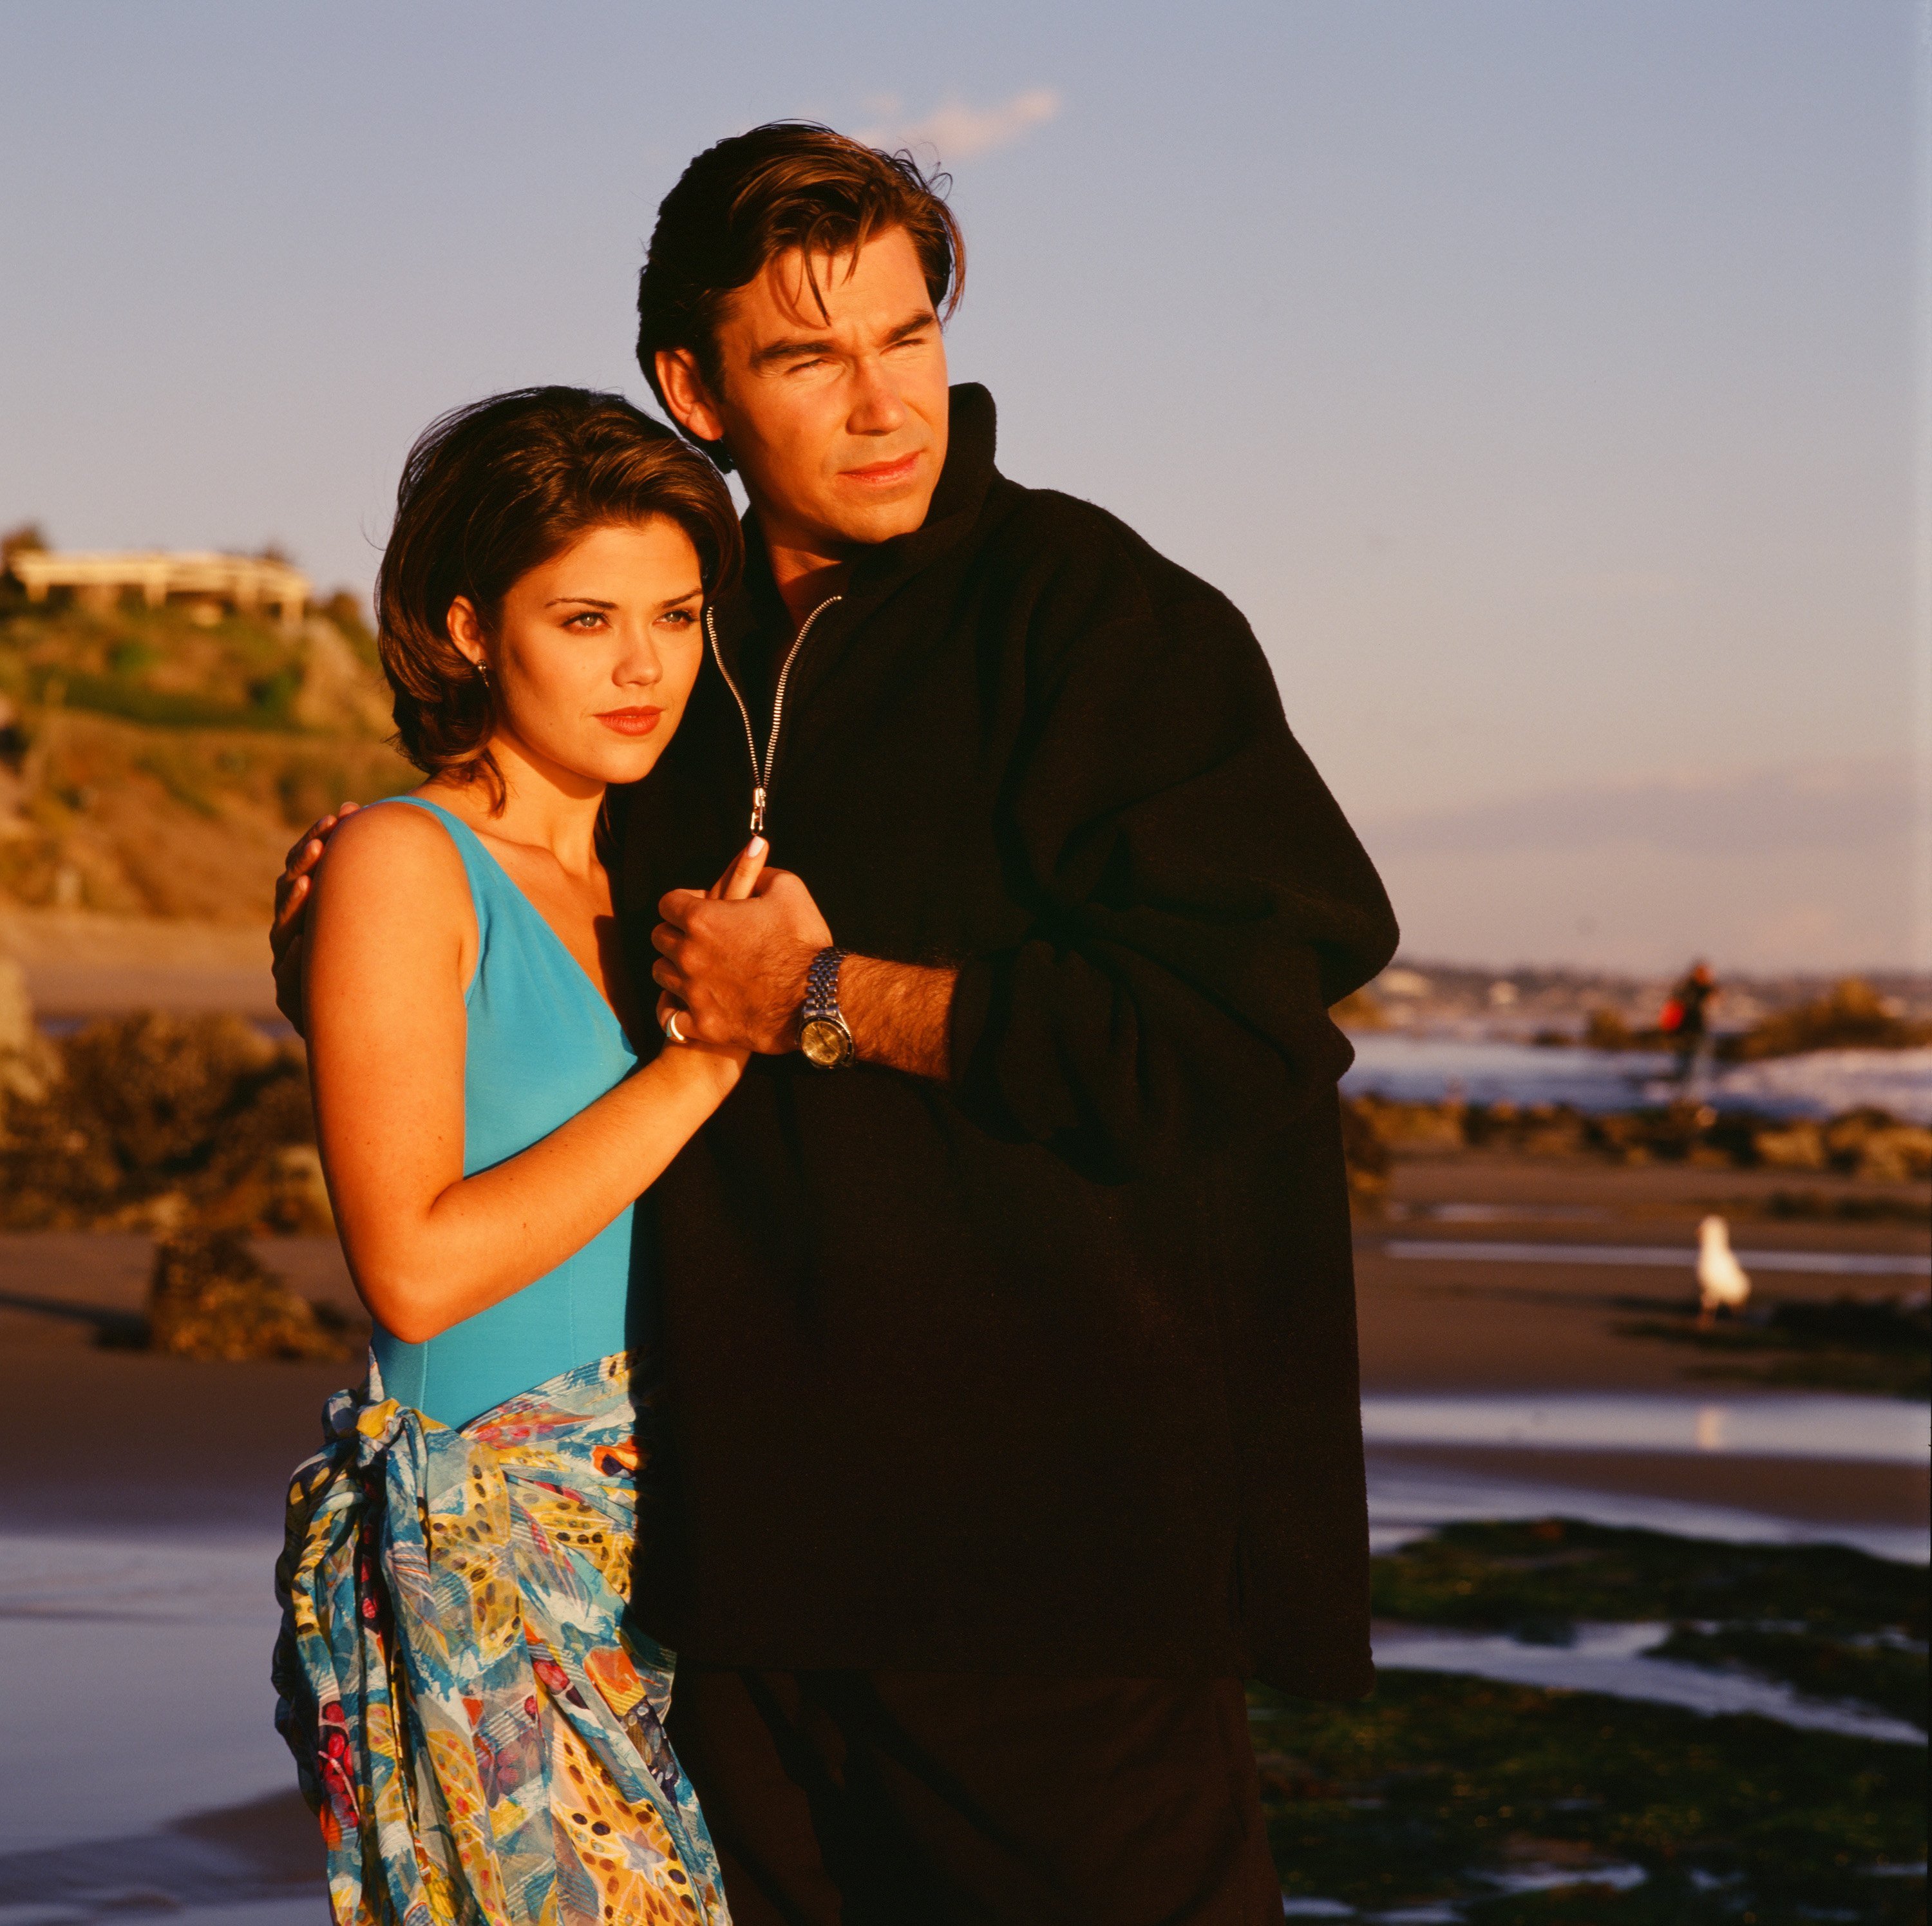 'Sunset Beach' actor Susan Ward in a blue print swimsuit, and Clive Robertson dressed in a black jacket.